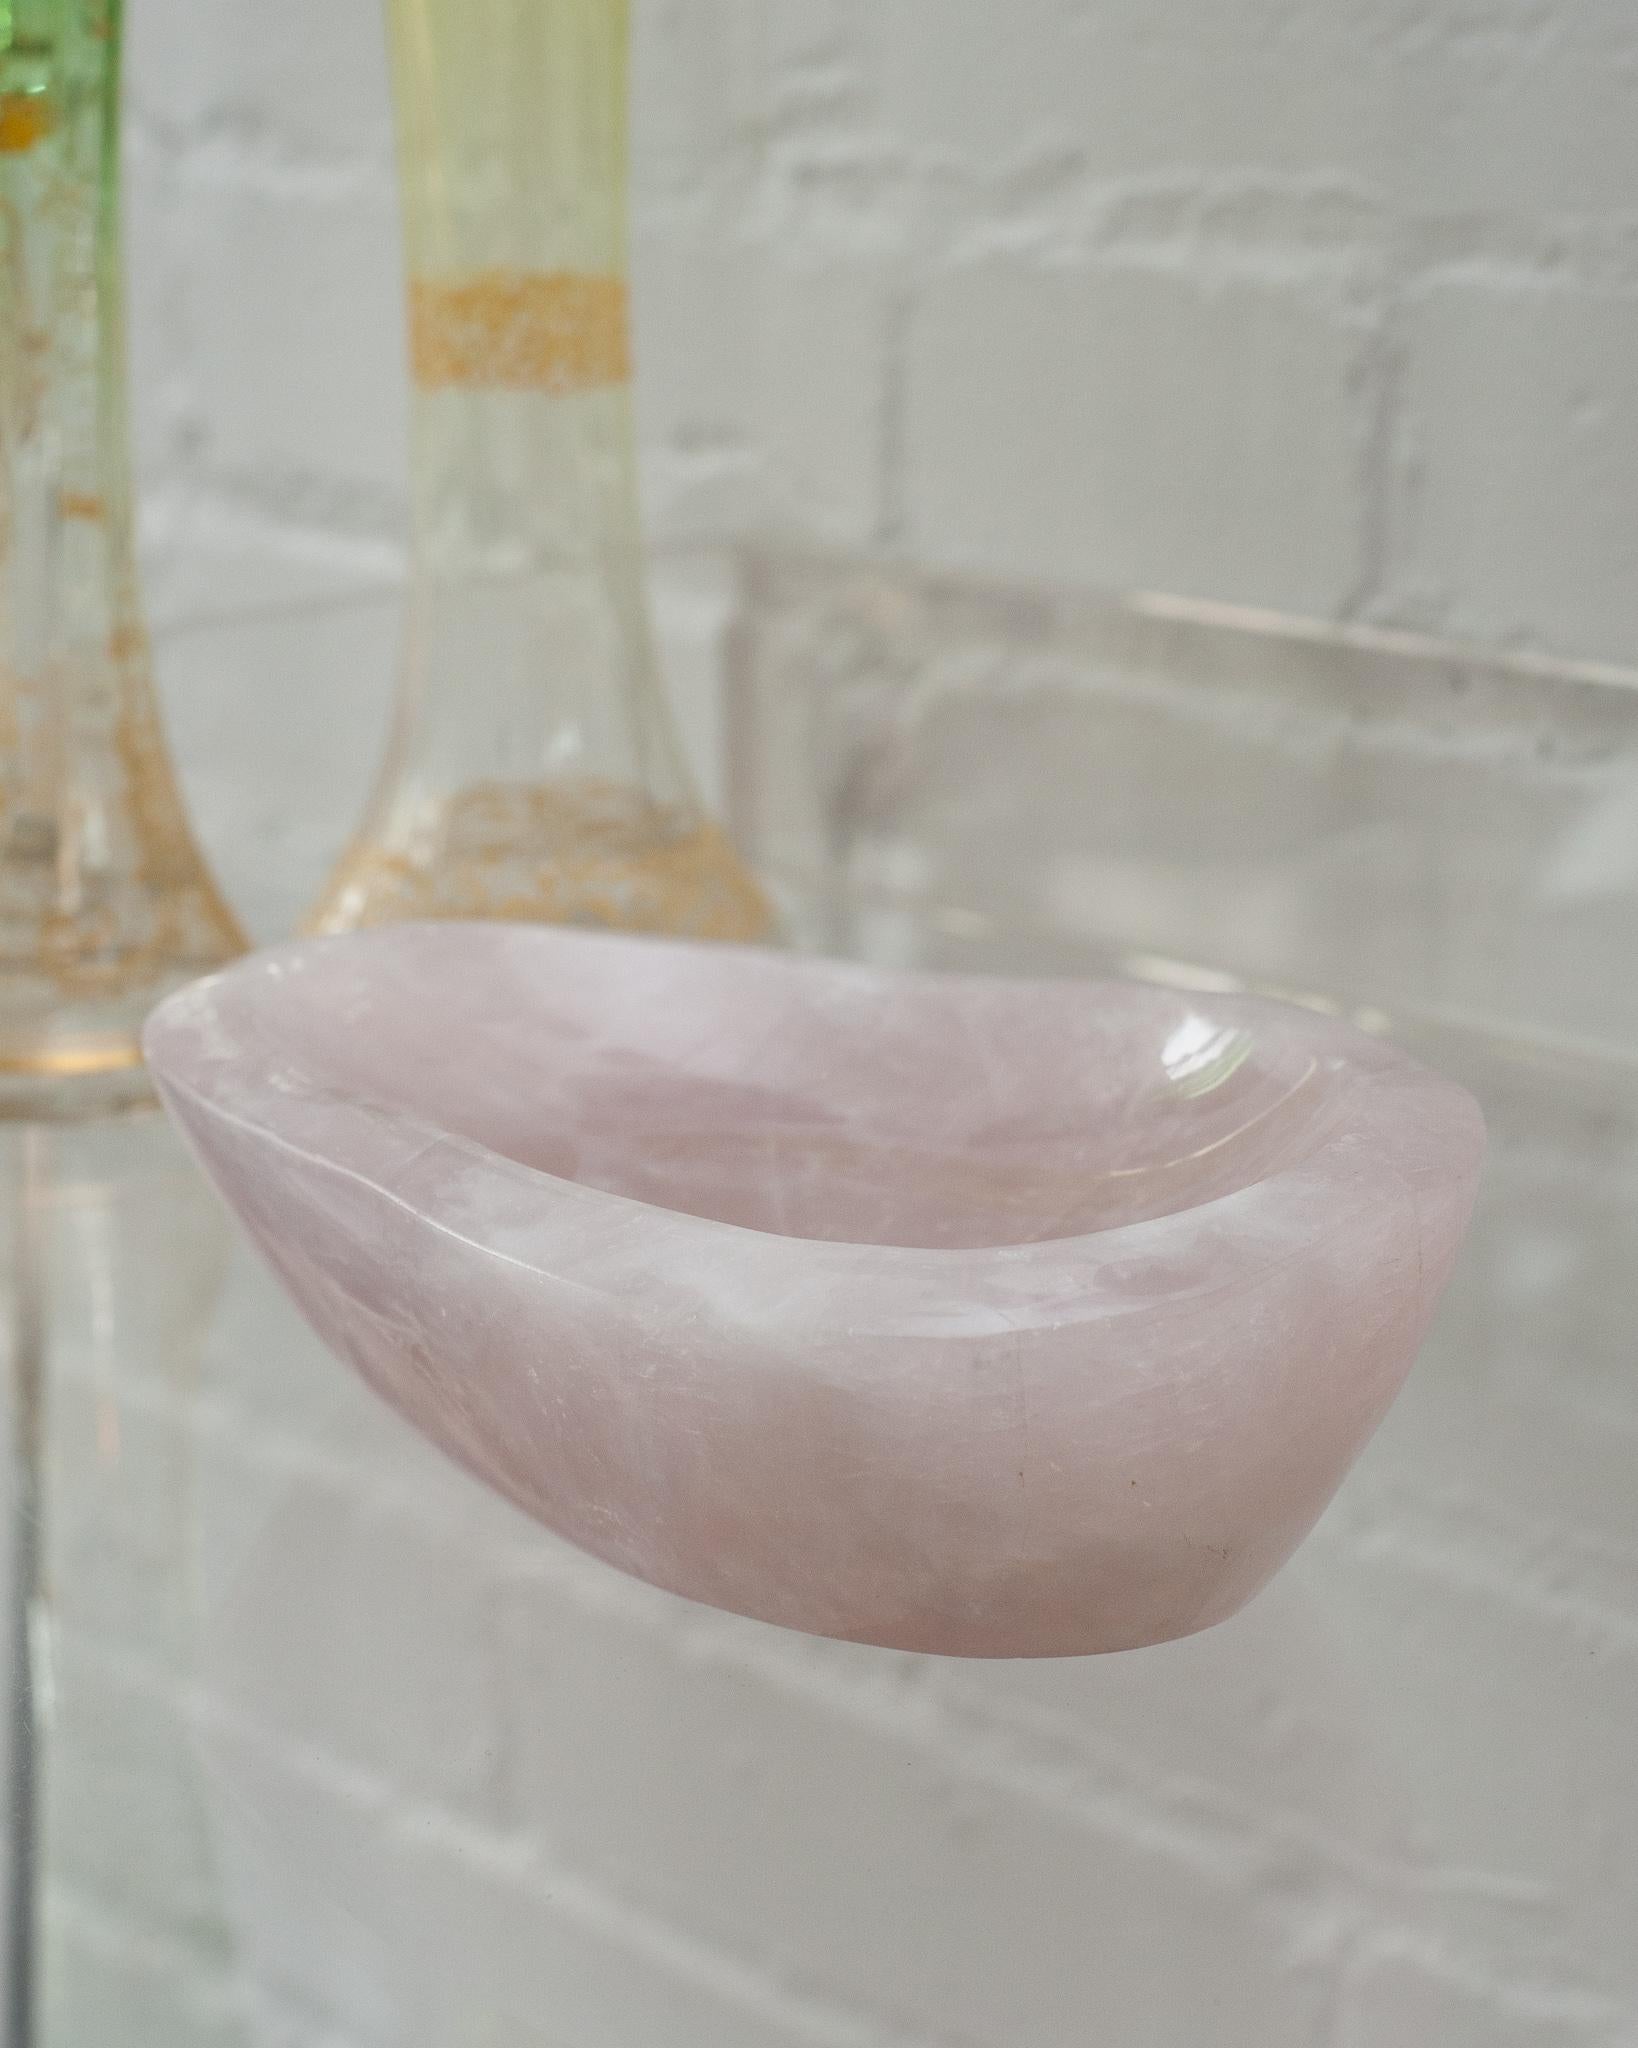 Bring the healing energy of rose quartz into your home with this beautiful carved bowl. This substantial and thick cut bowl can filled with candies or kept sculptural as an empty vessel and placed in any space. Rose quartz, the universal stone of